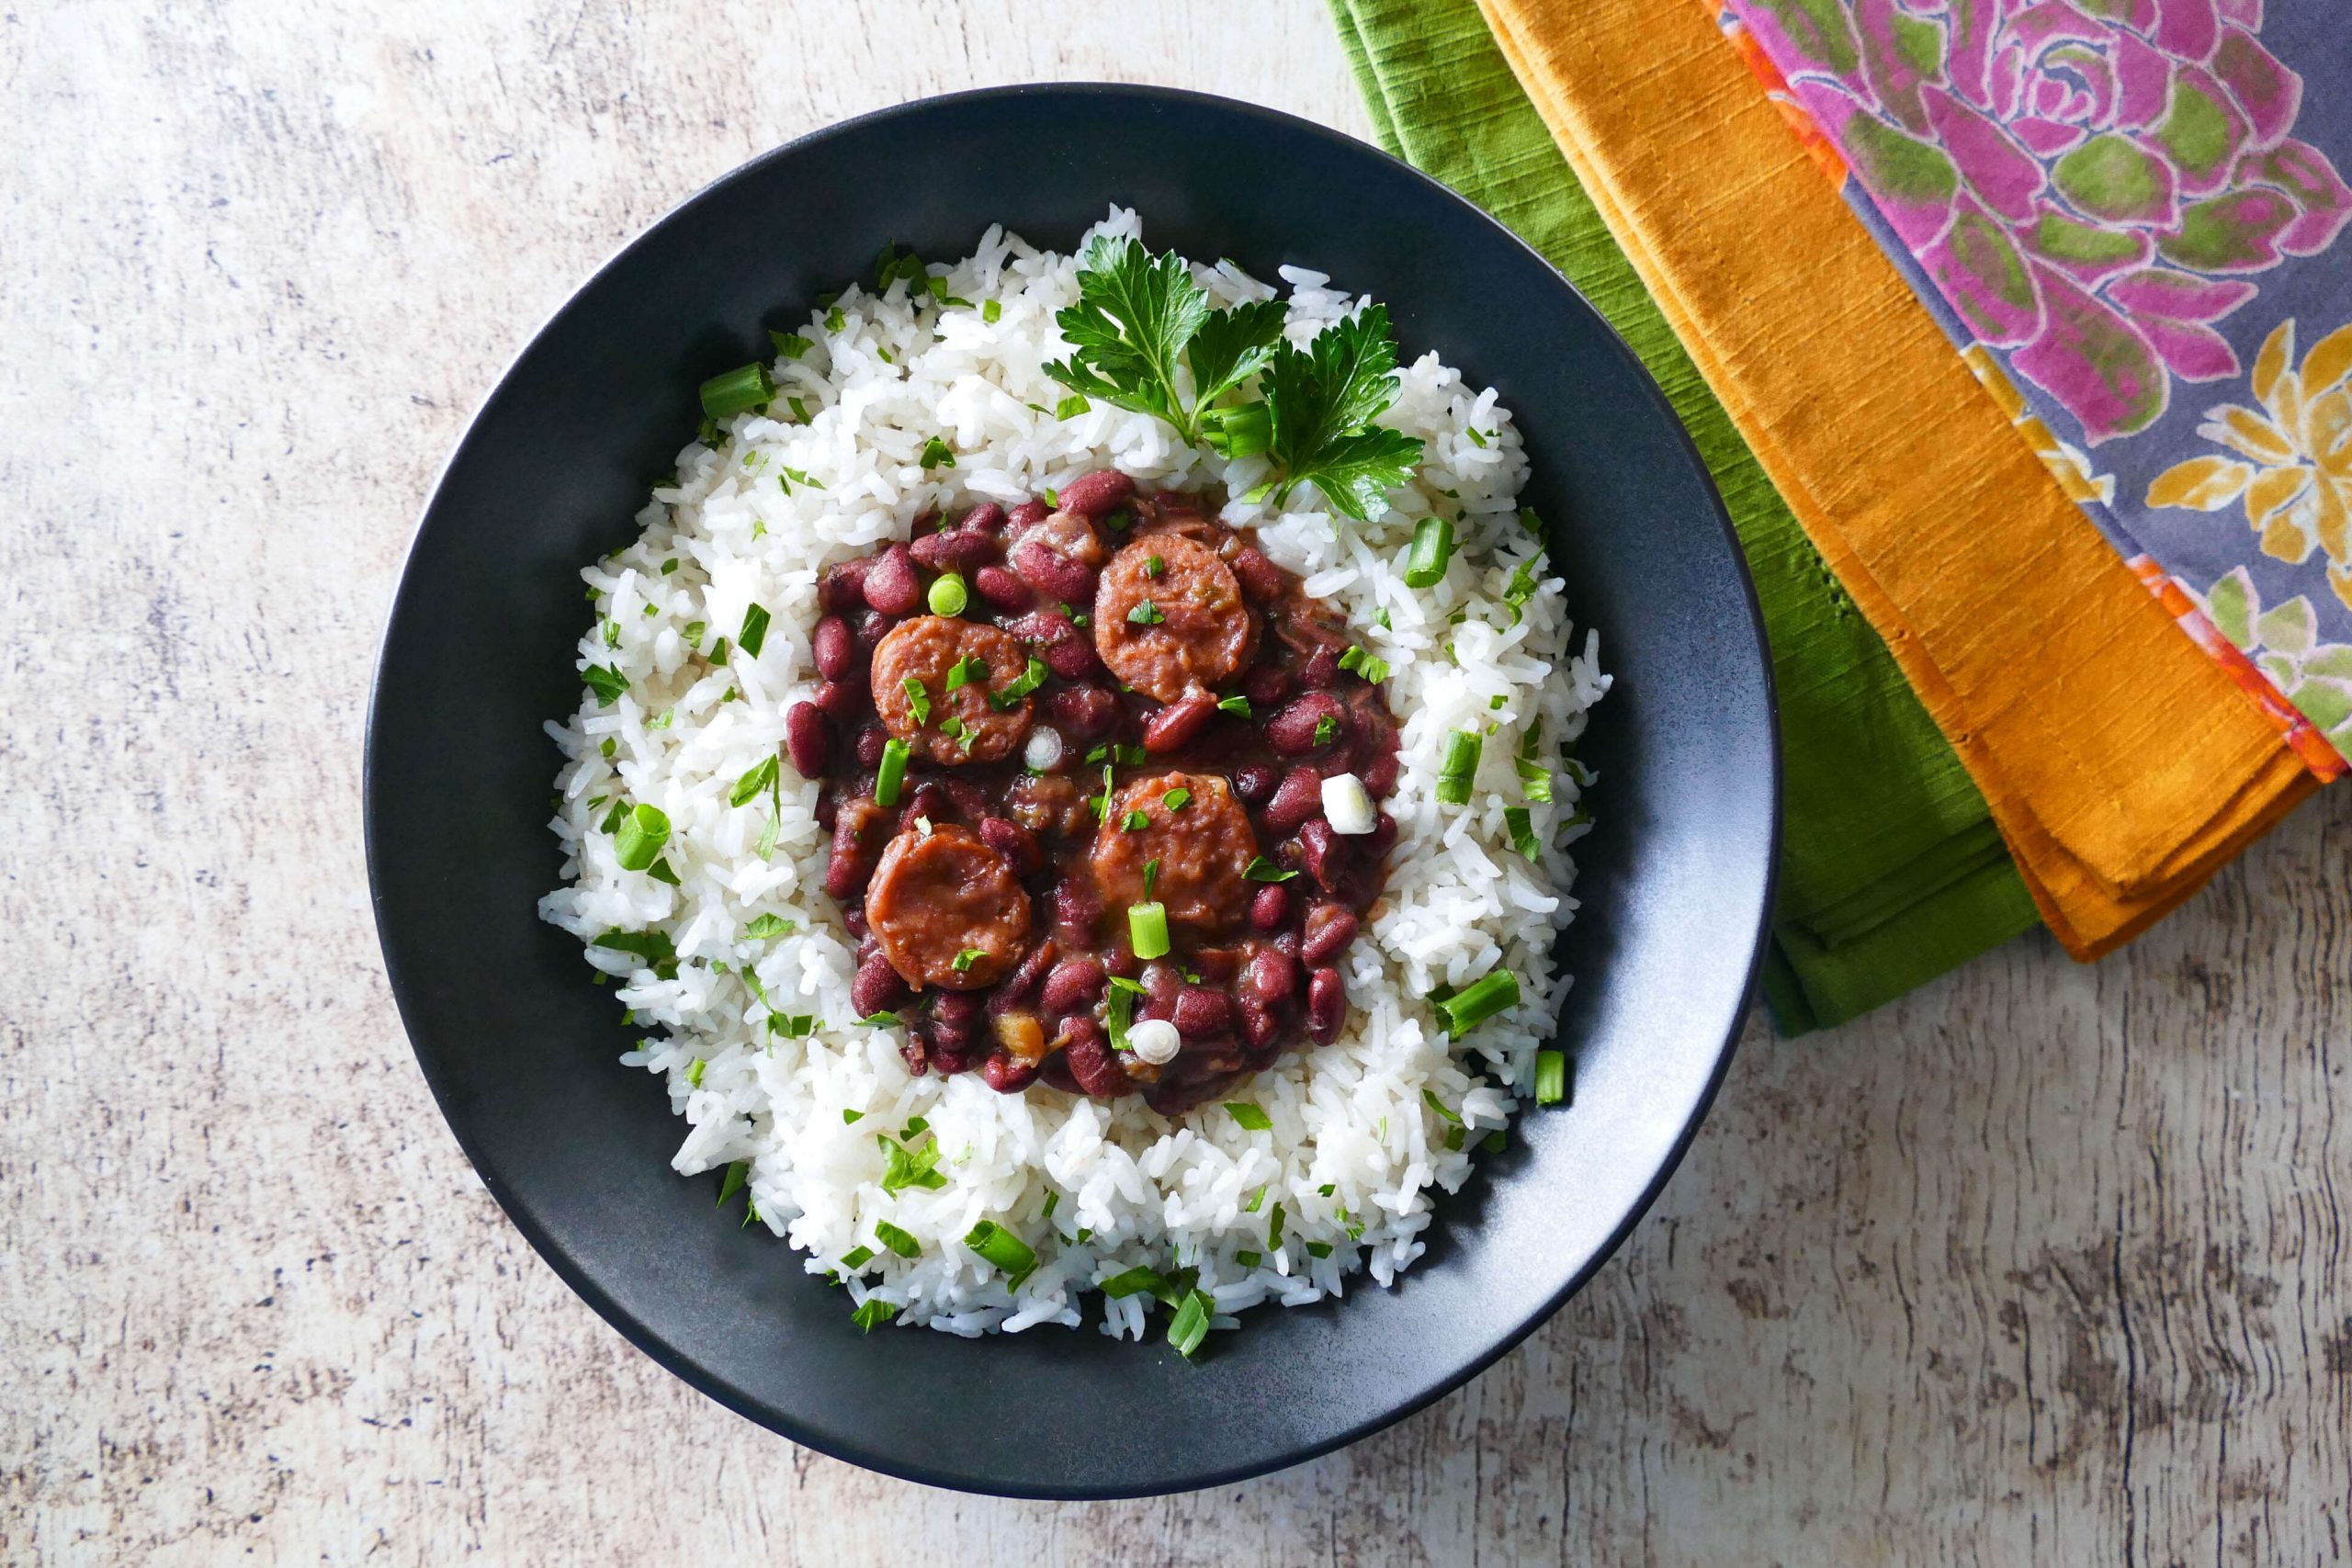 Instant Pot Red Beans and Sausage served on rice in a black bowl on a white wooden background with multicolor napkins. Garnished with parsley and green onions - Paint the Kitchen Red